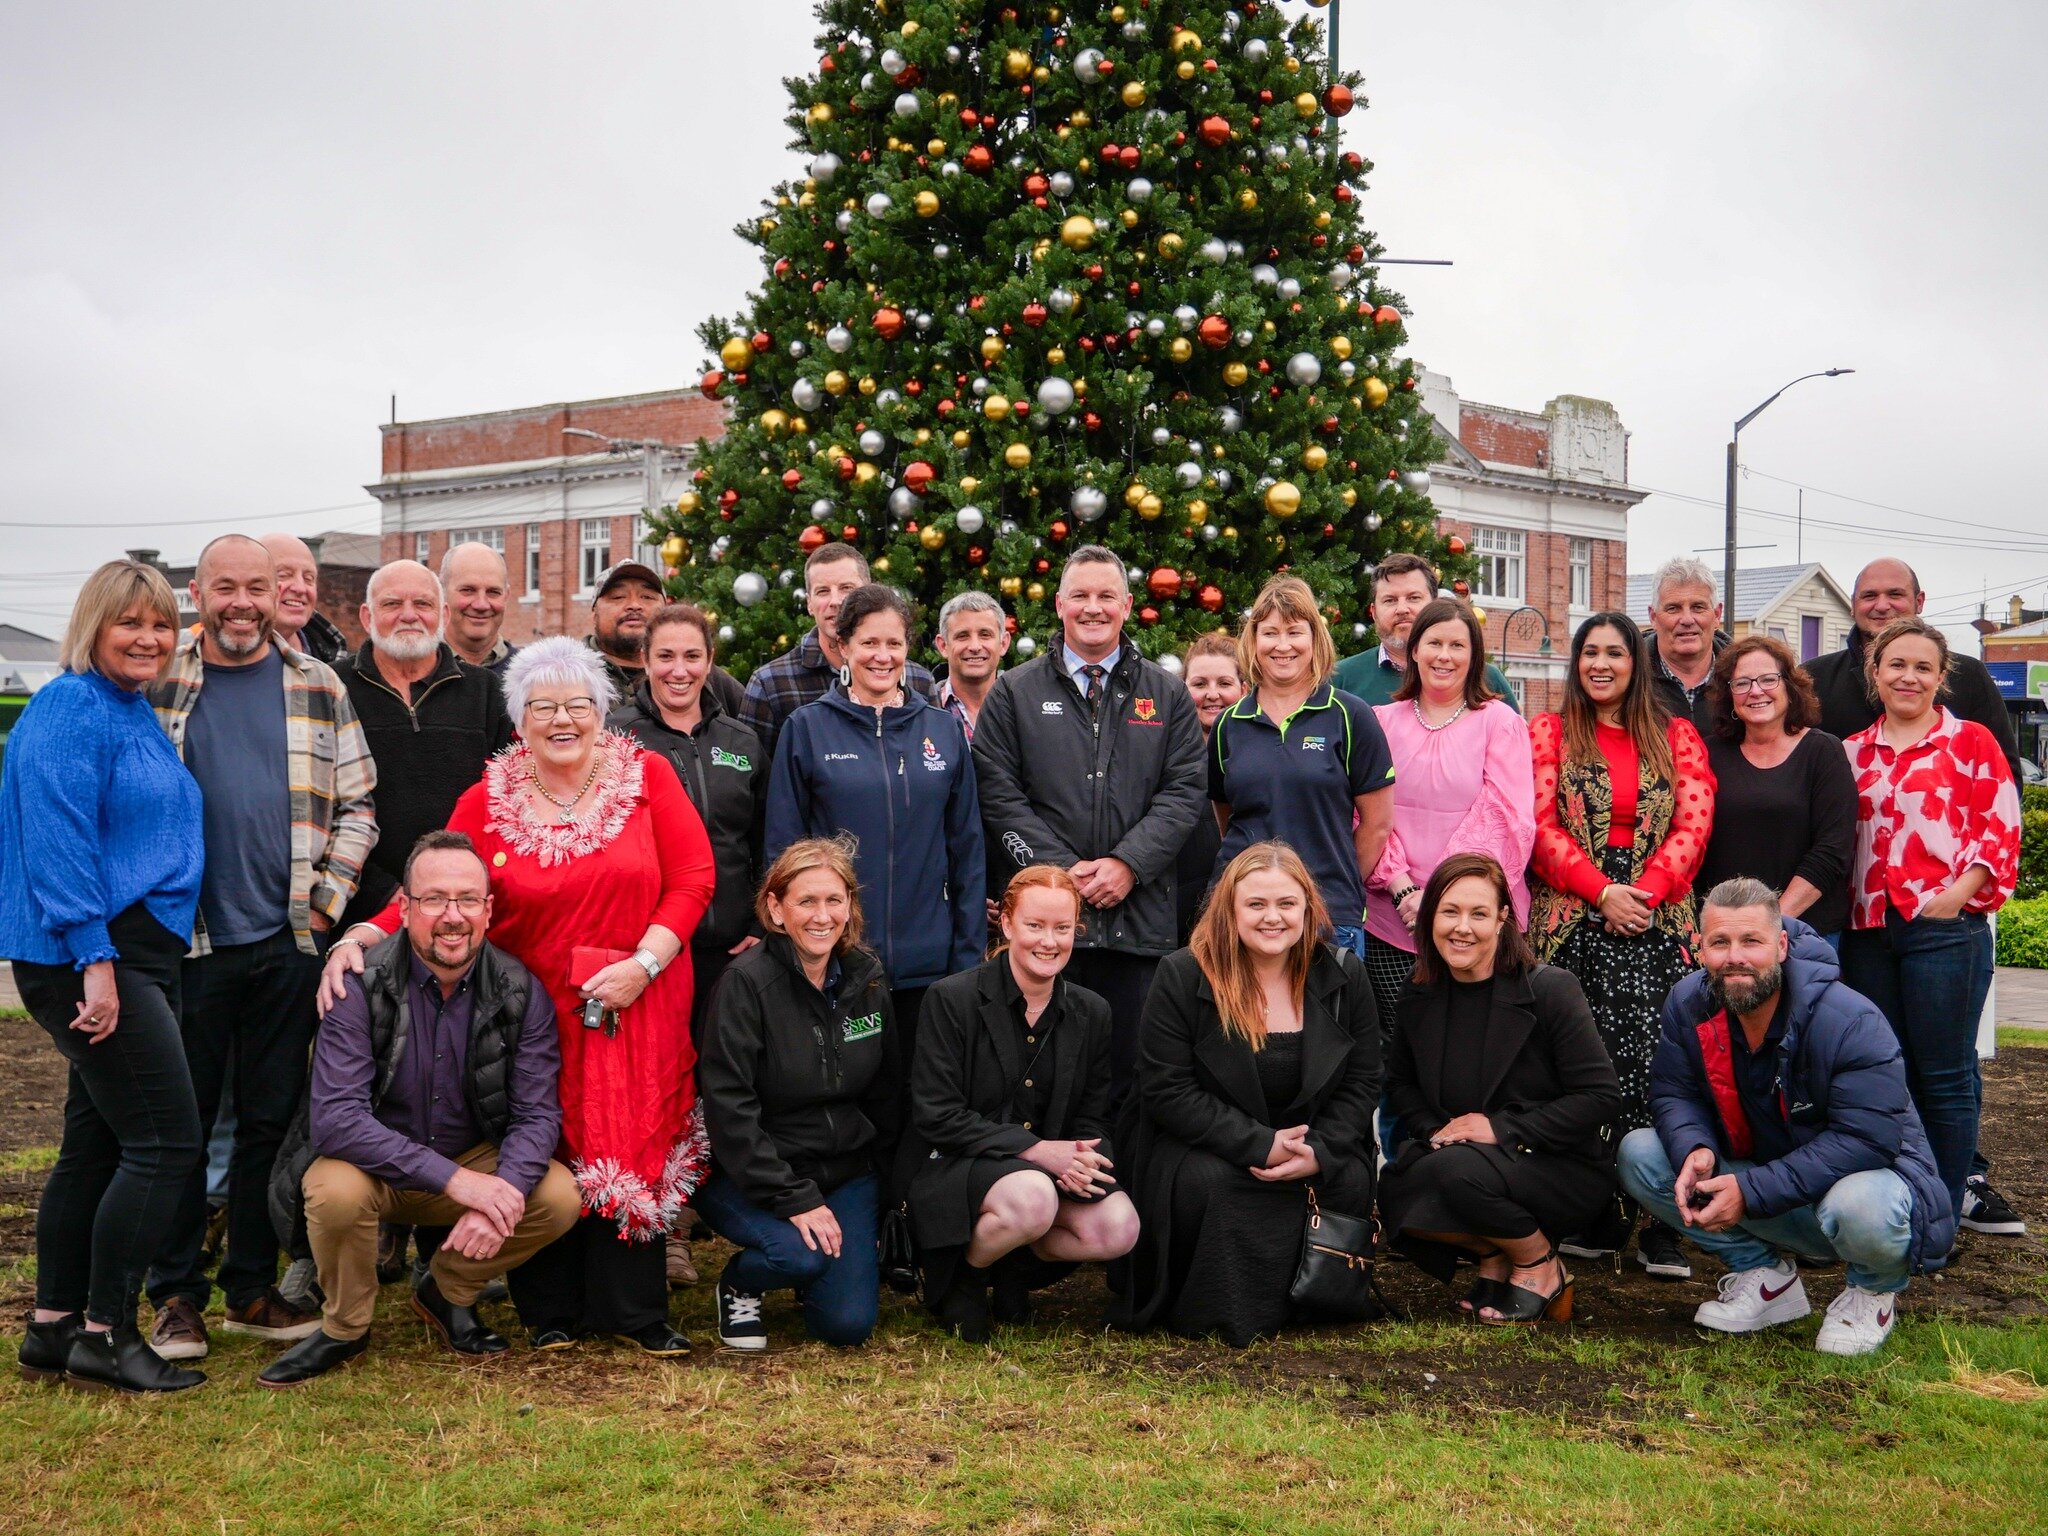 We were blown away with how many people turned up to Friday night's Christmas Tree 🎄launch. It was absolutely wonderful to see so many families and members of the Marton community out and about. As we've said a million times, this has been a true co